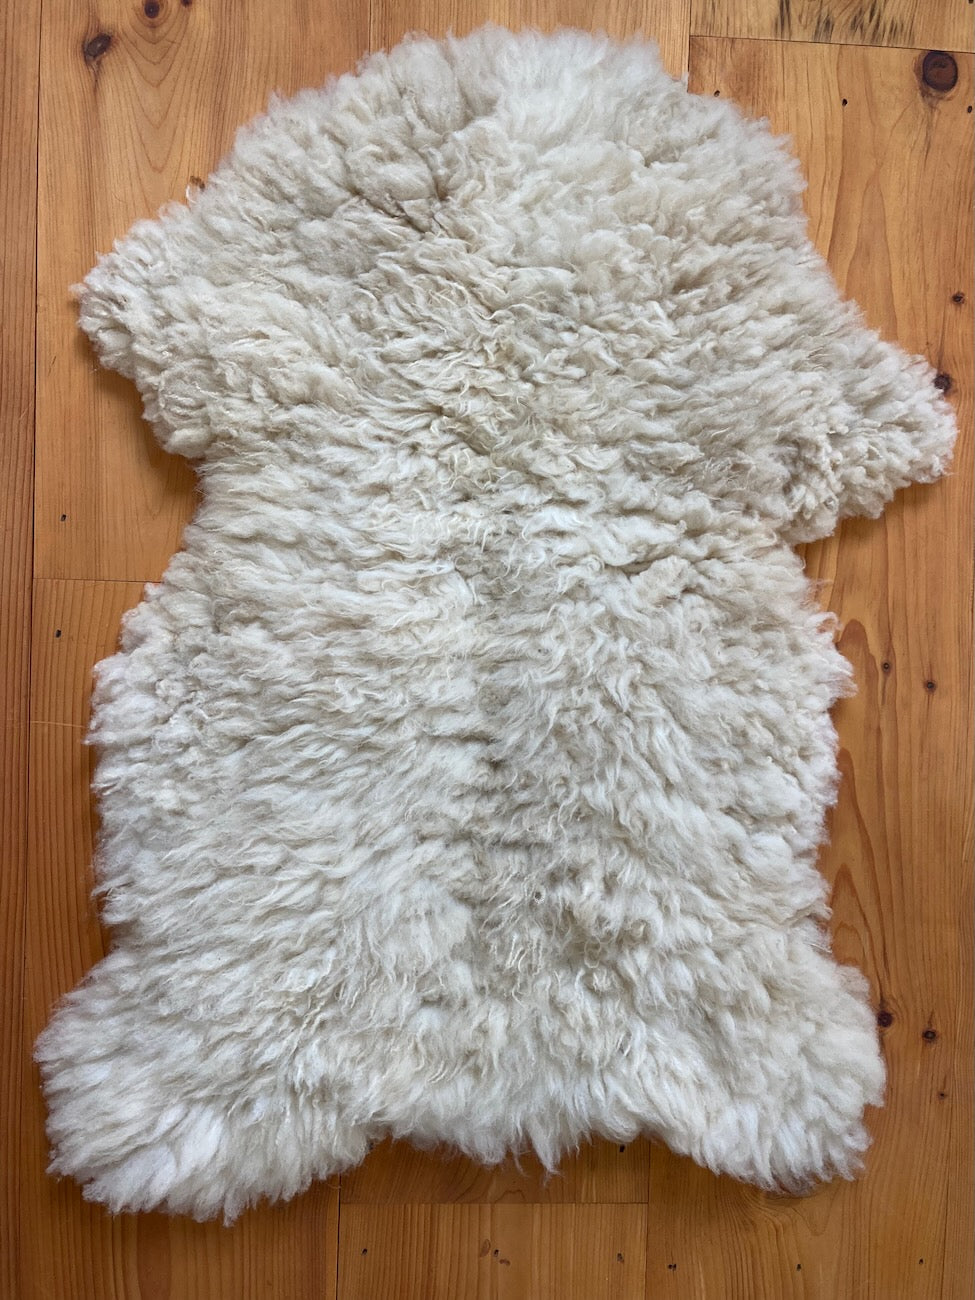 This fluffy white sheepskin is perfect for throwing over a chair or to put at the foot of your bed.